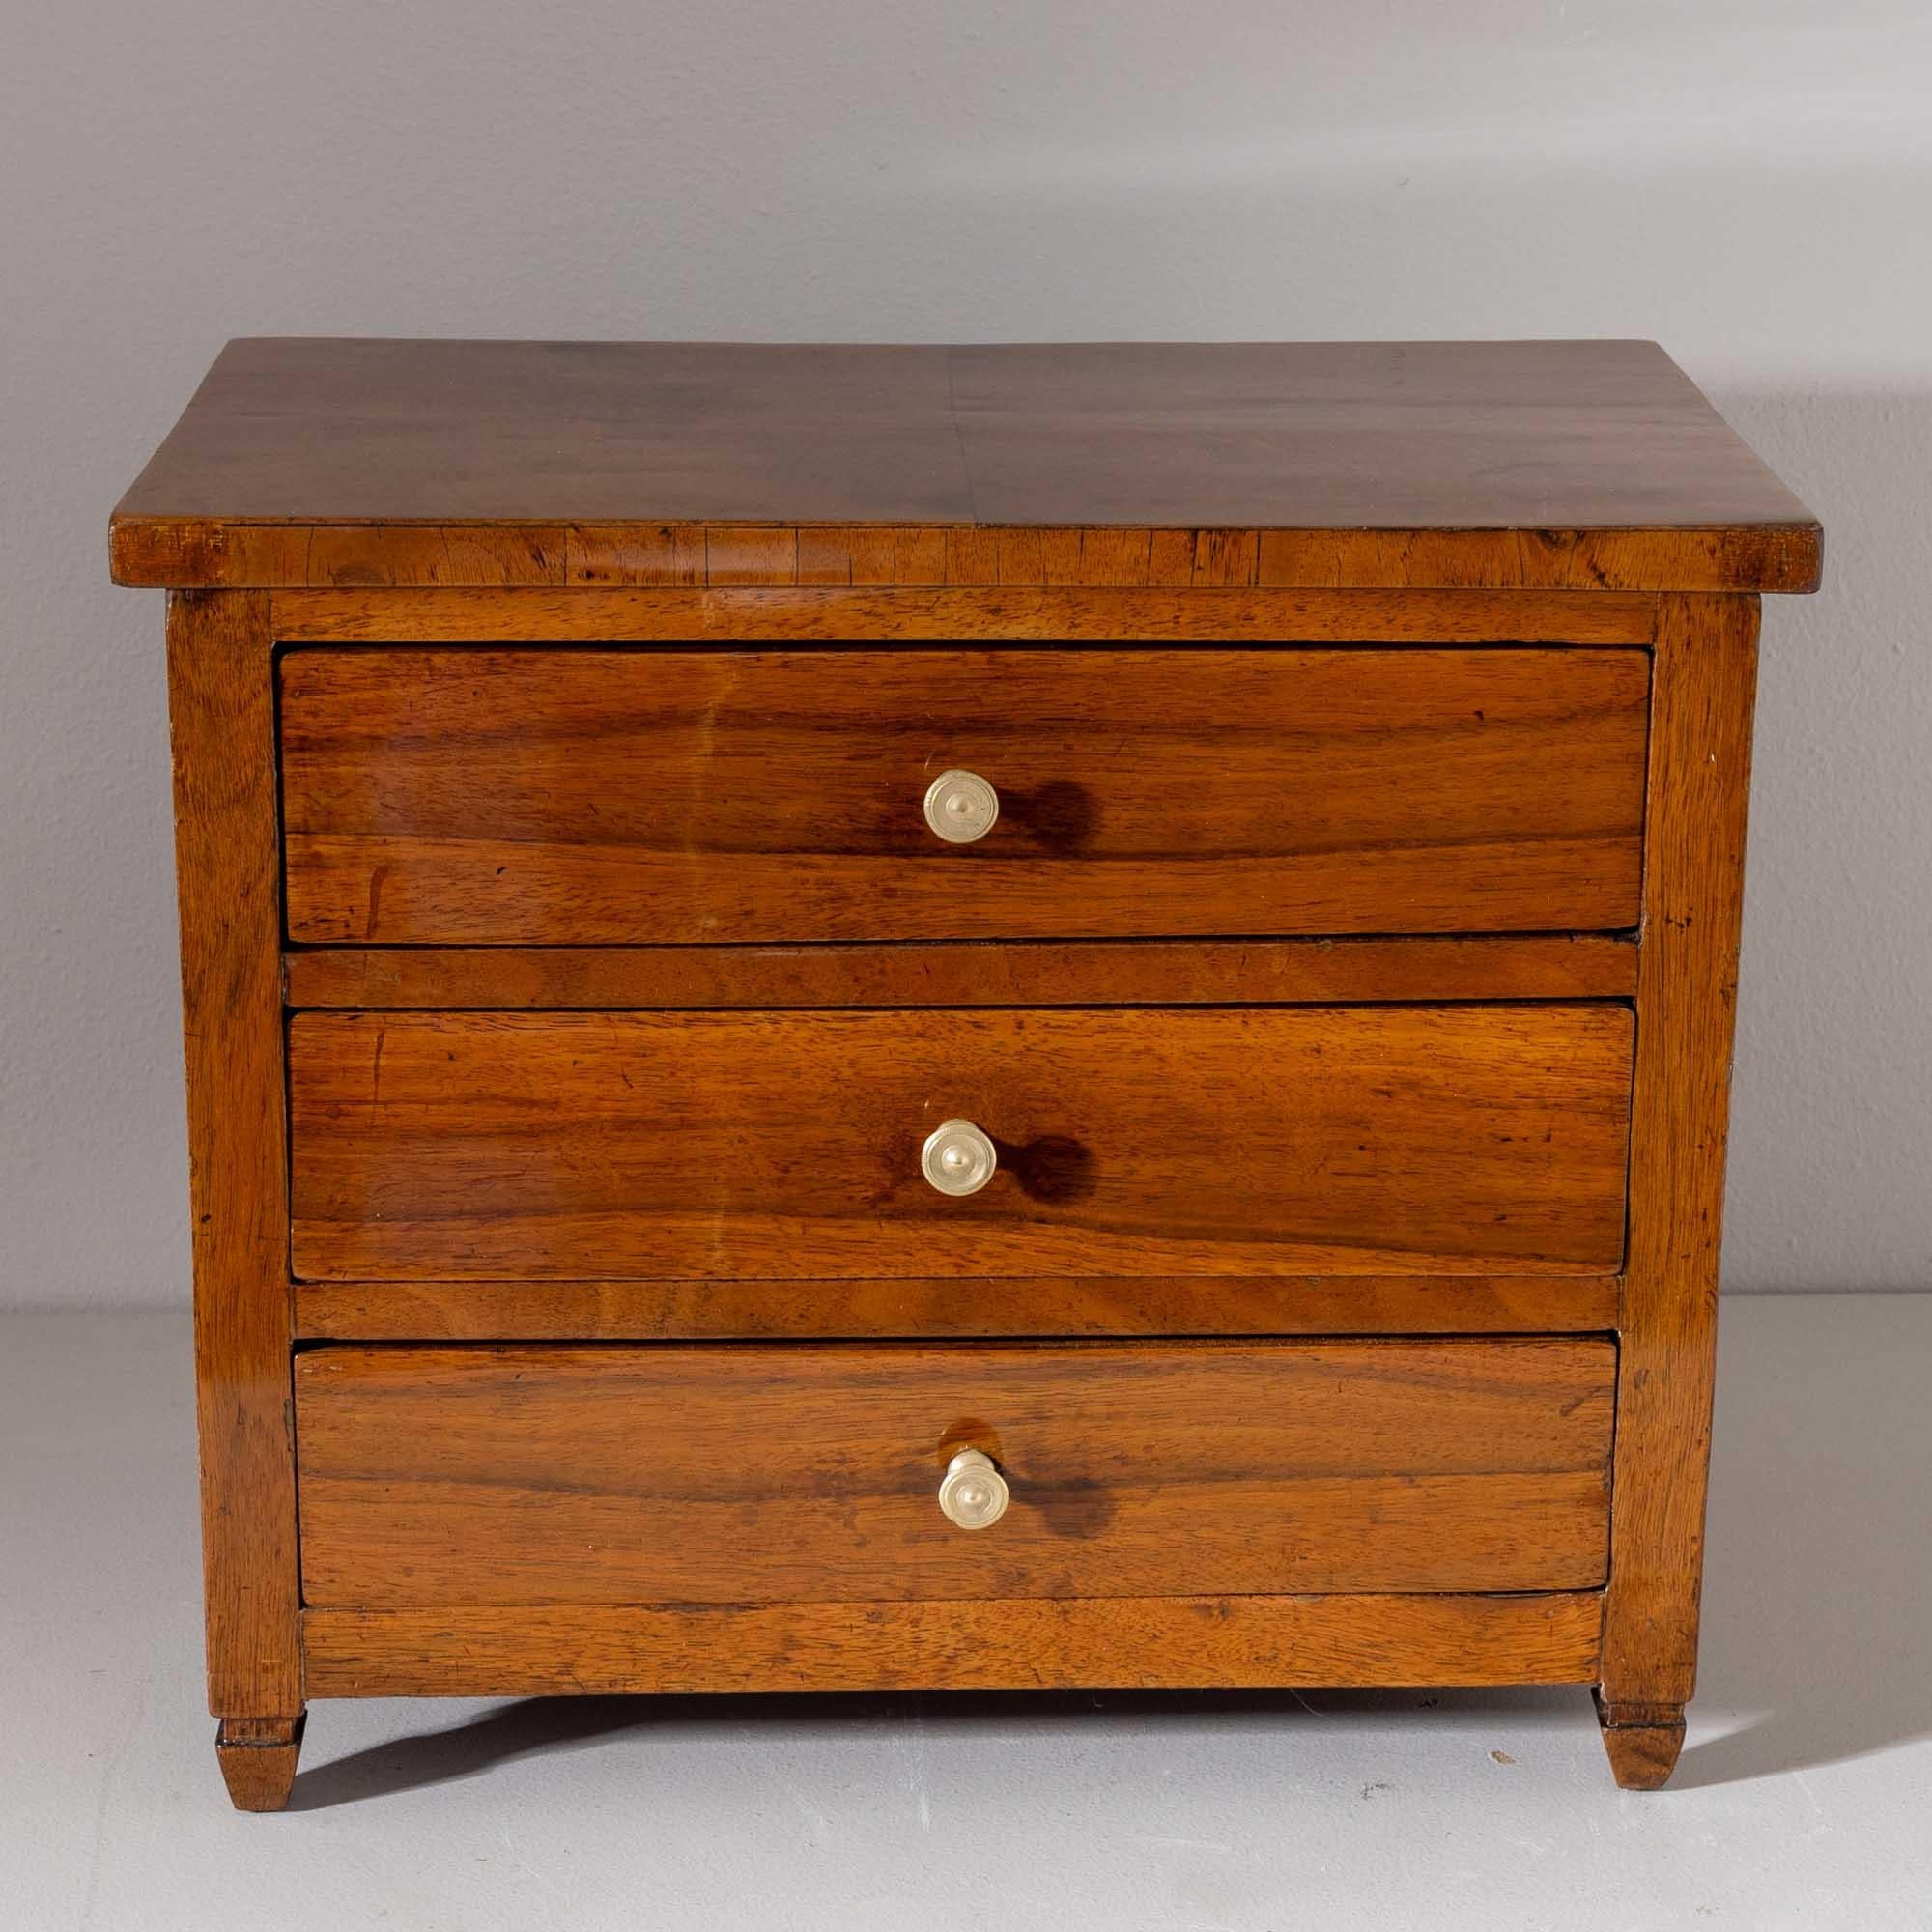 Miniature chest of drawers made of walnut with small square pointed feet and brass knobs. The chest of drawers was restored and polished by hand.